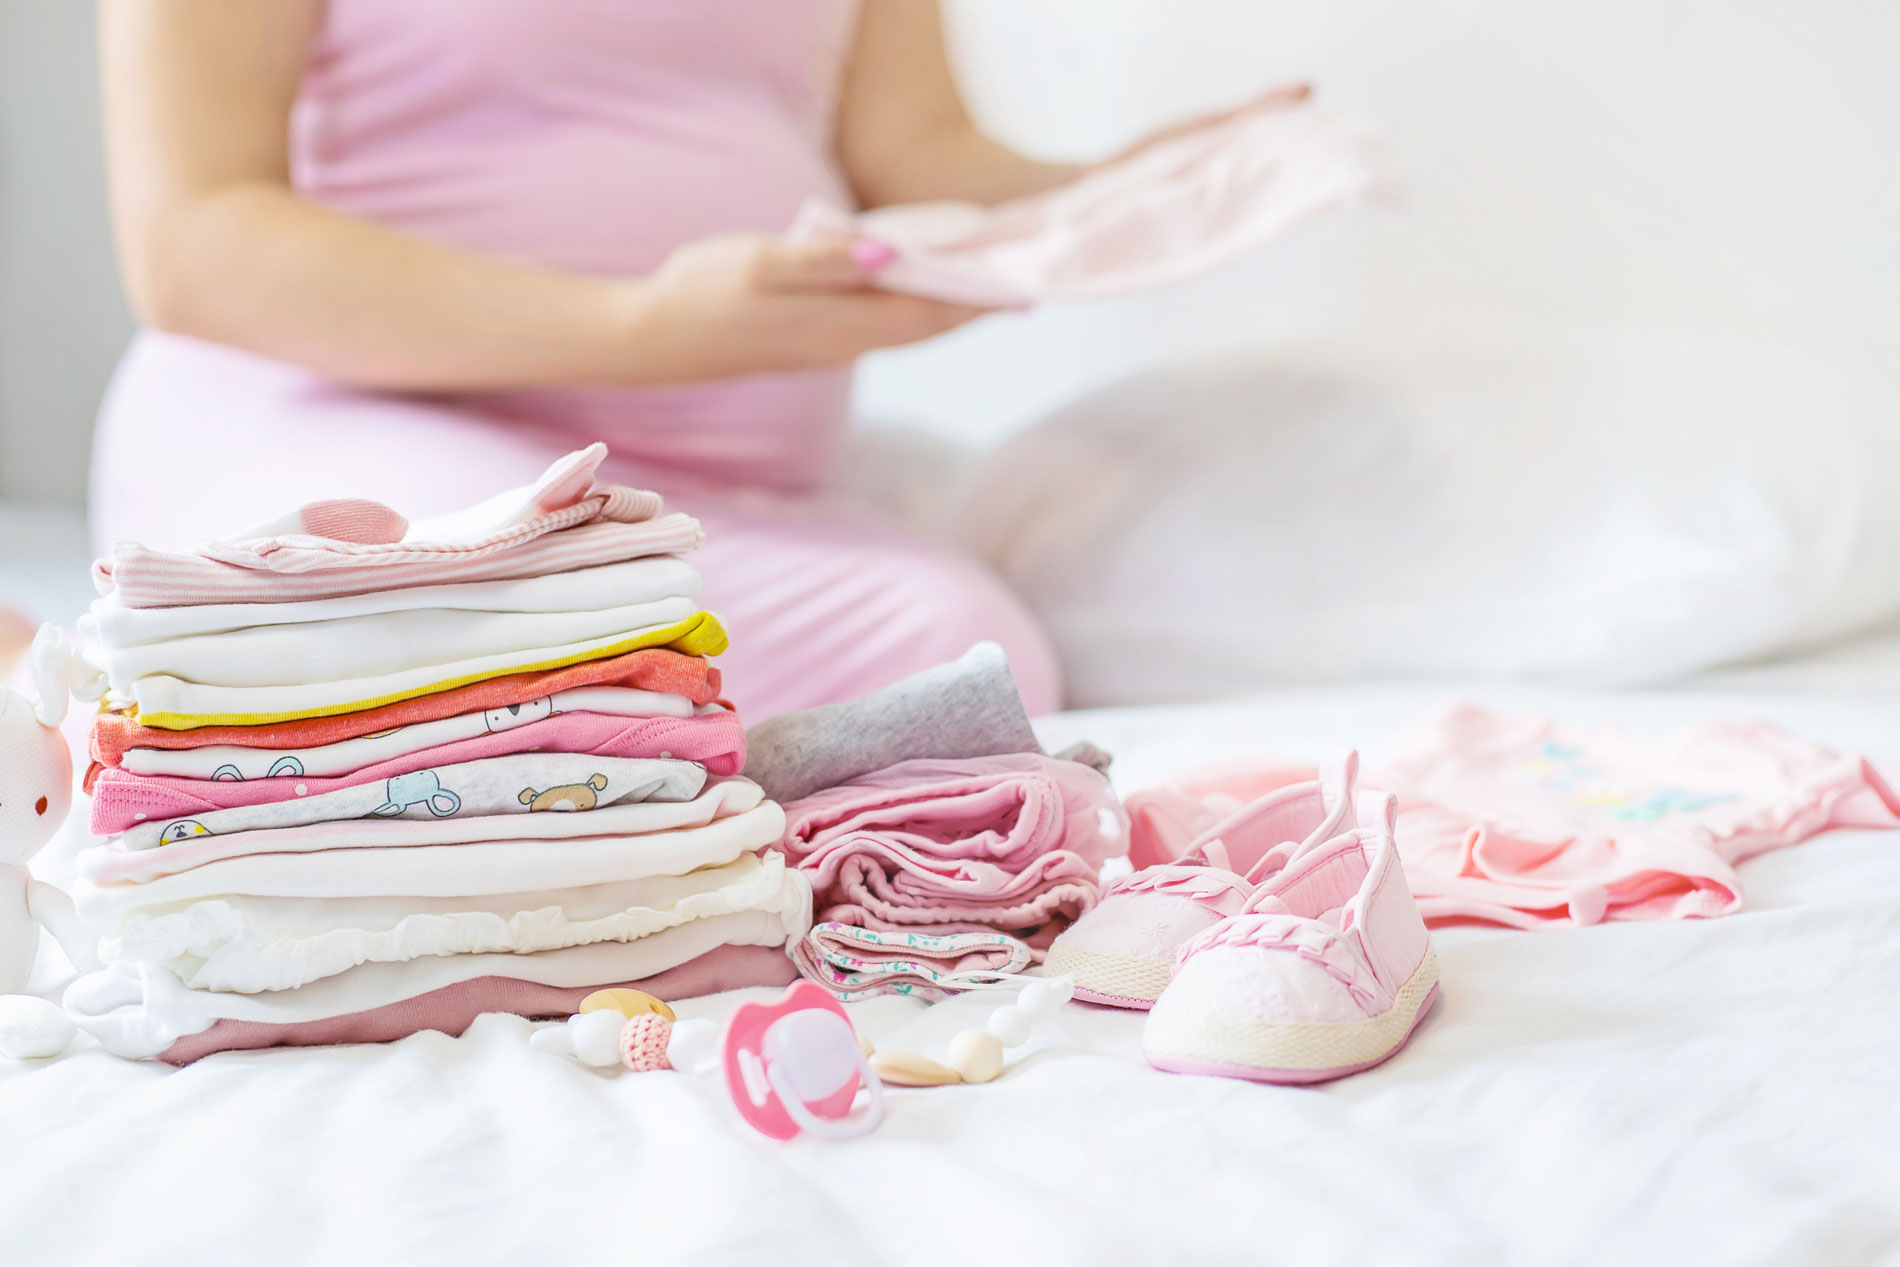 A pregnant woman sorting through baby things and folding baby clothes